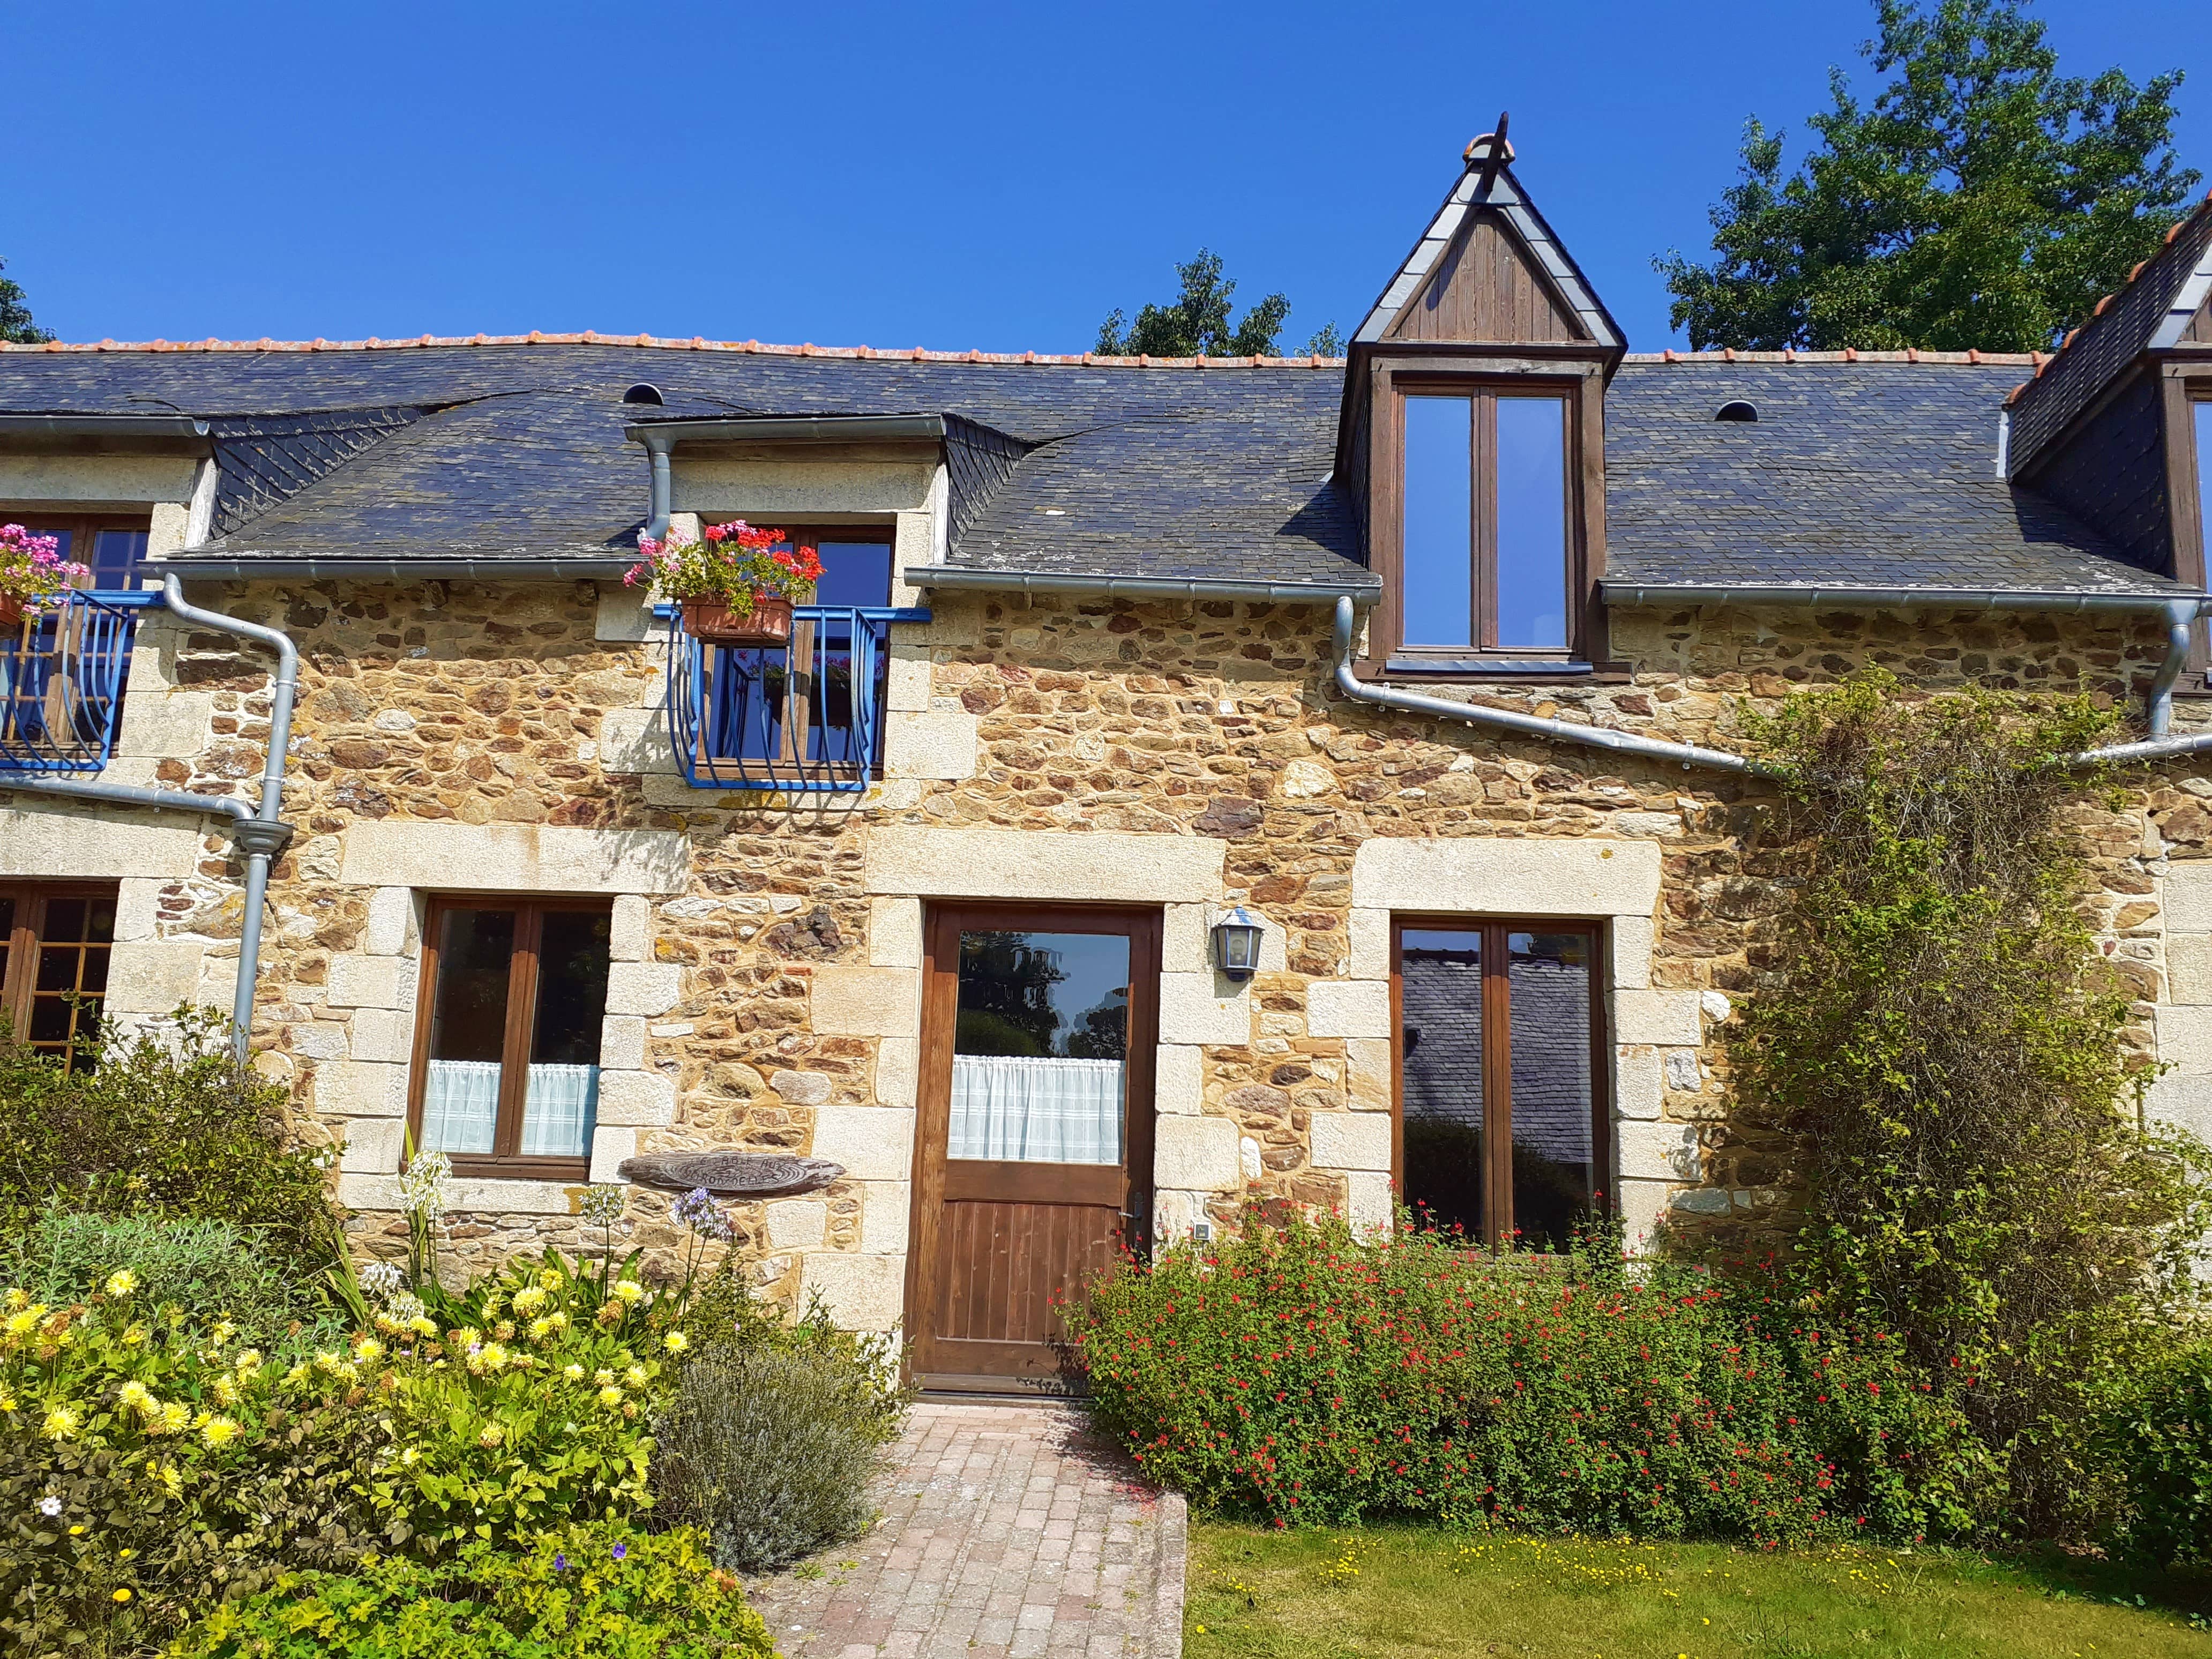 la julerie photo of the Swallow's Barn, the third of four cottages in Brittany